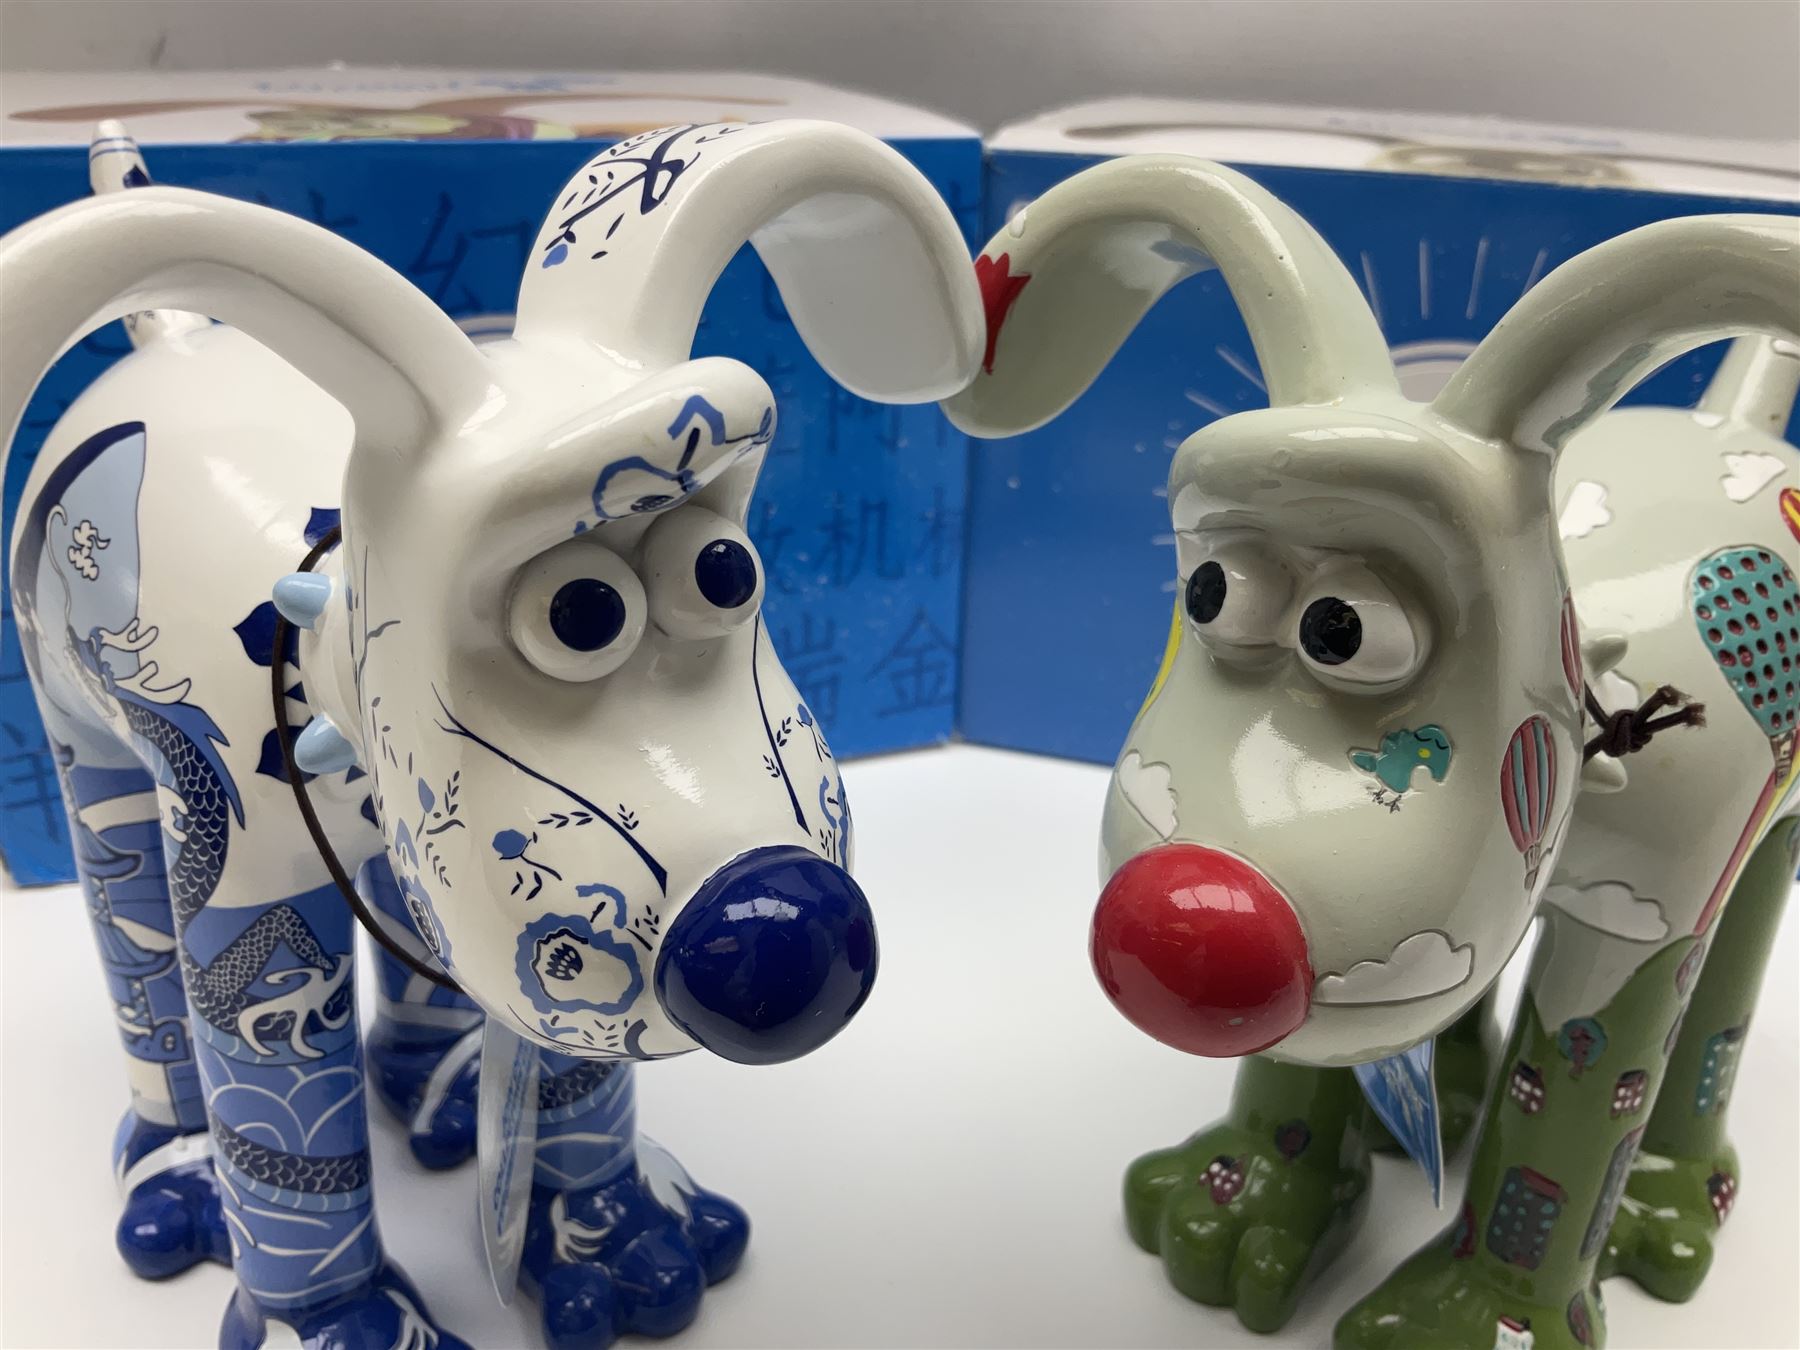 Wallace & Gromit - Gromit Unleashed: two Aardman Animations The Grand Appeal 'Gromit Unleashed' figu - Image 6 of 9